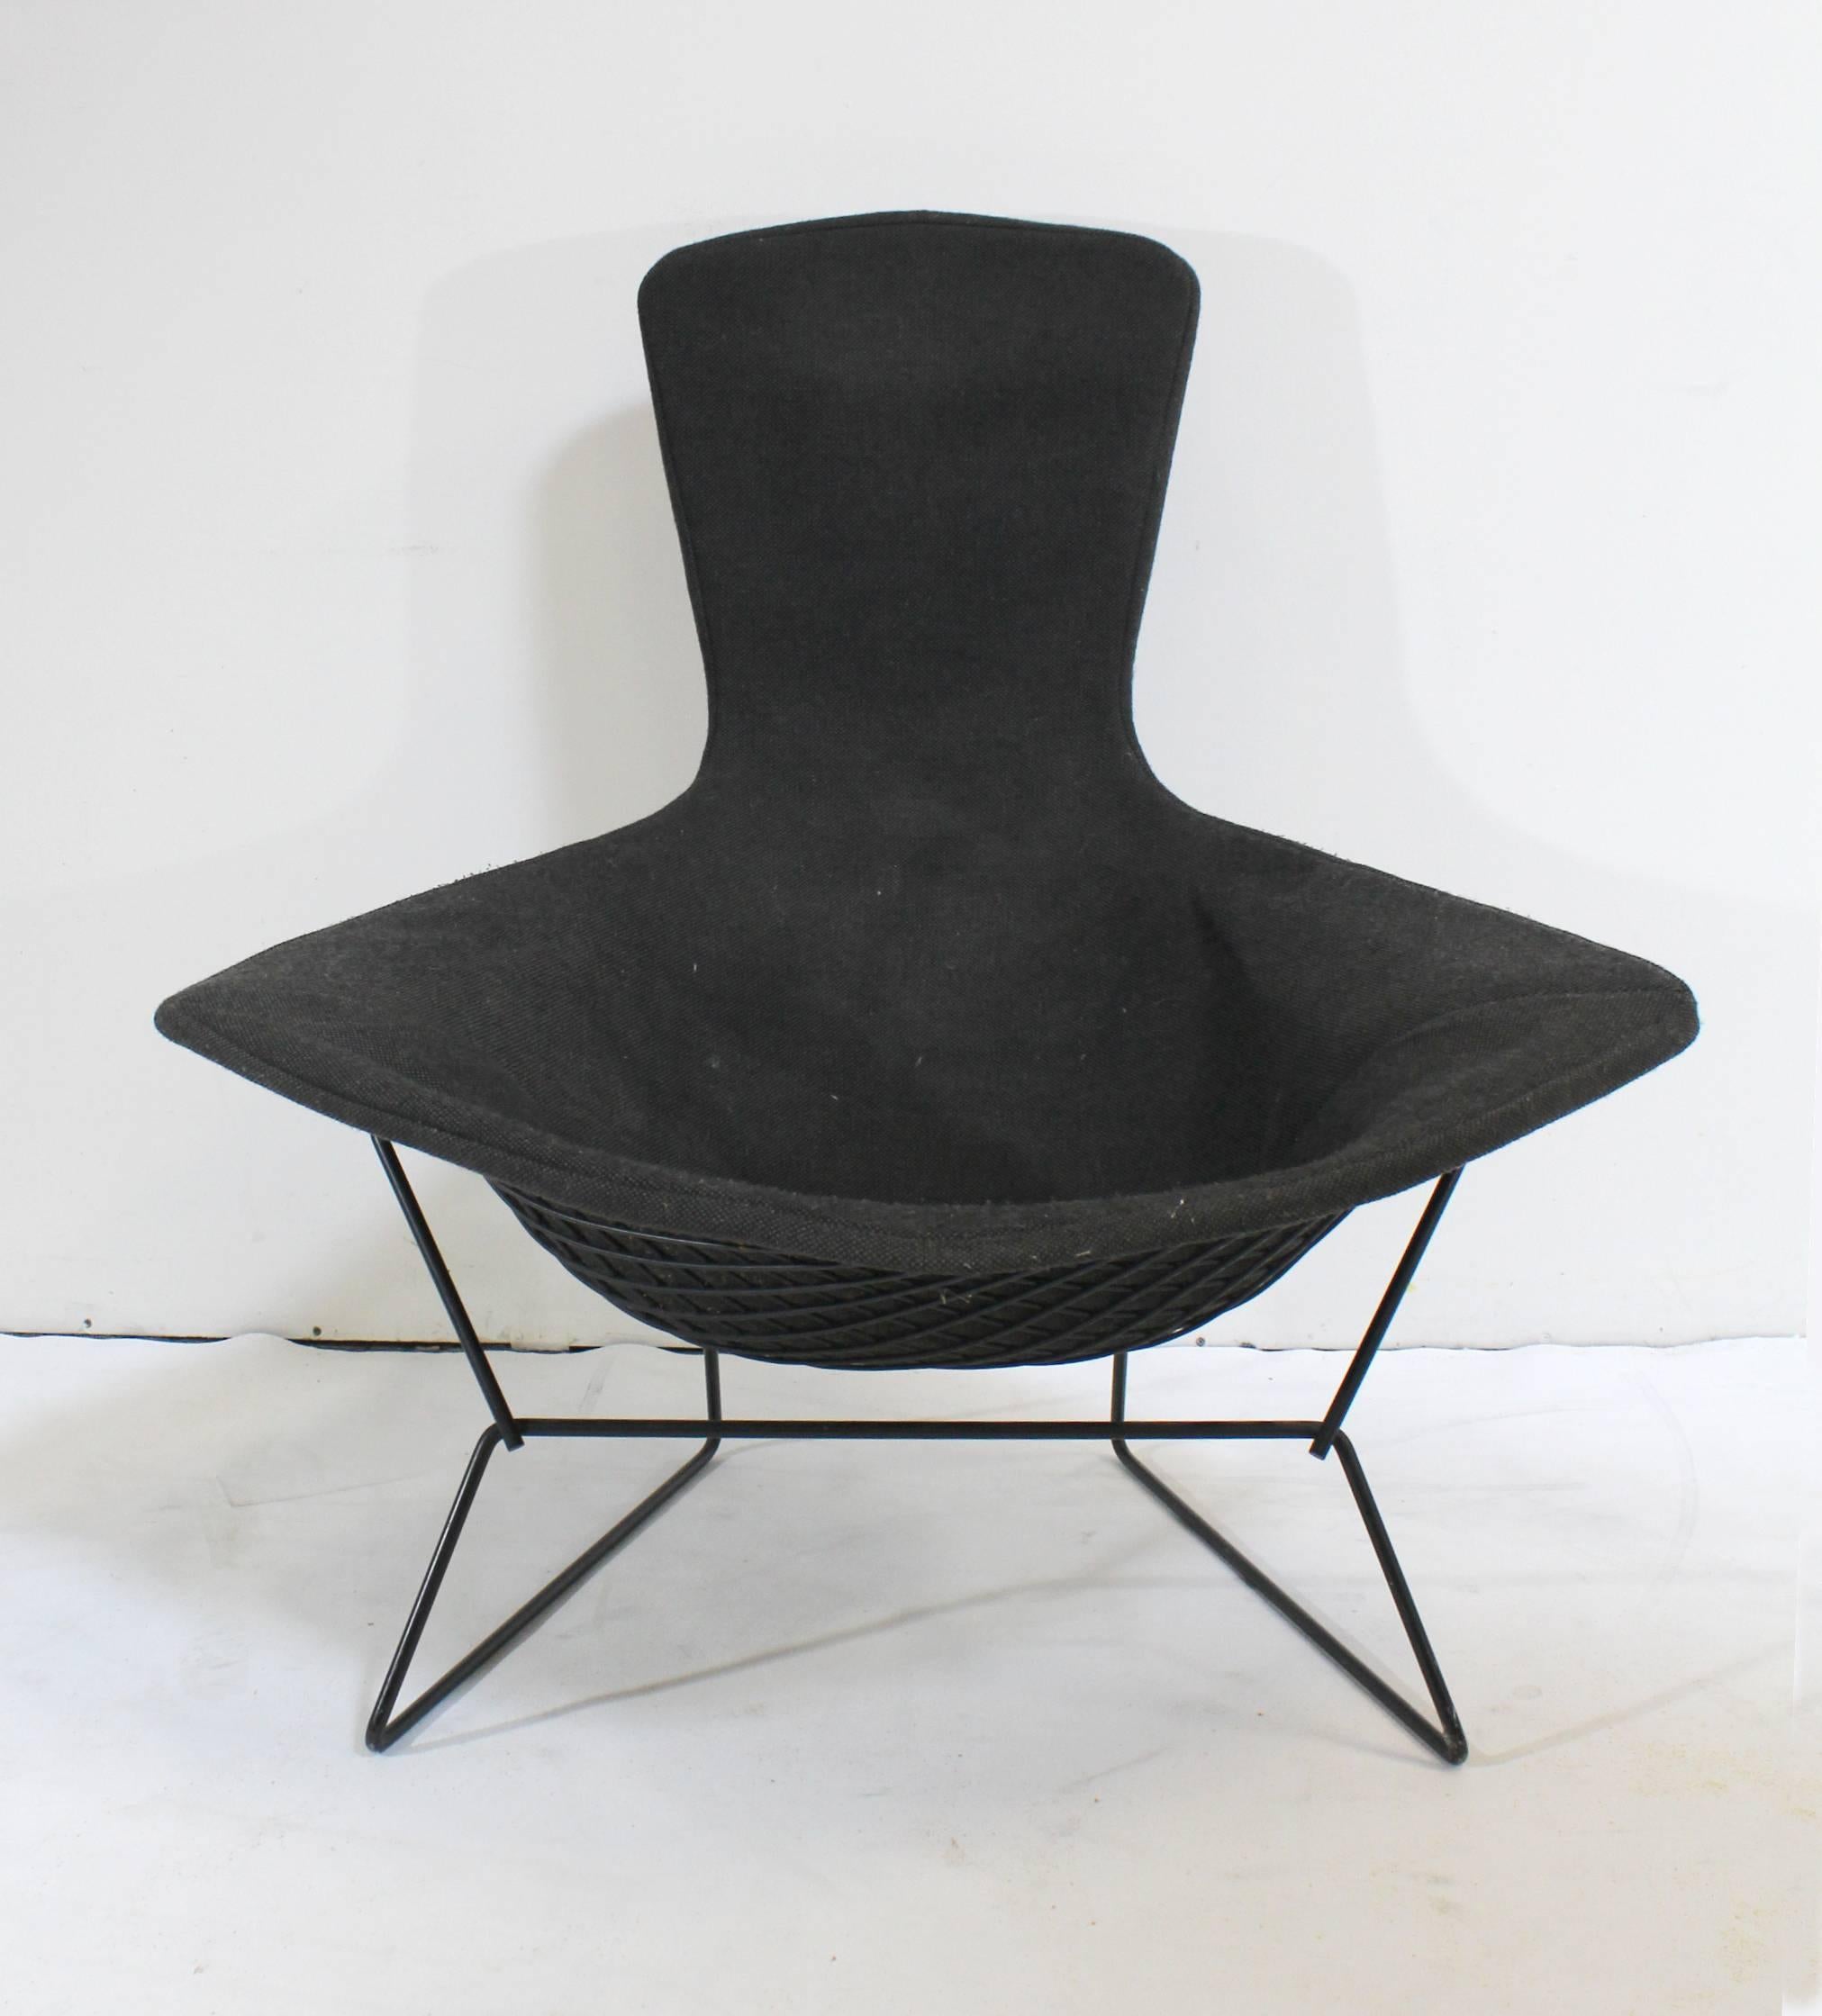 The 'Bird' chair was designed by Harry Bertoia for Knoll in 1952. This piece probably dates from the 1970s. Classic midcentury accent chair. Charcoal black removable upholstery on black frame. Ottoman has original Knoll tag (see